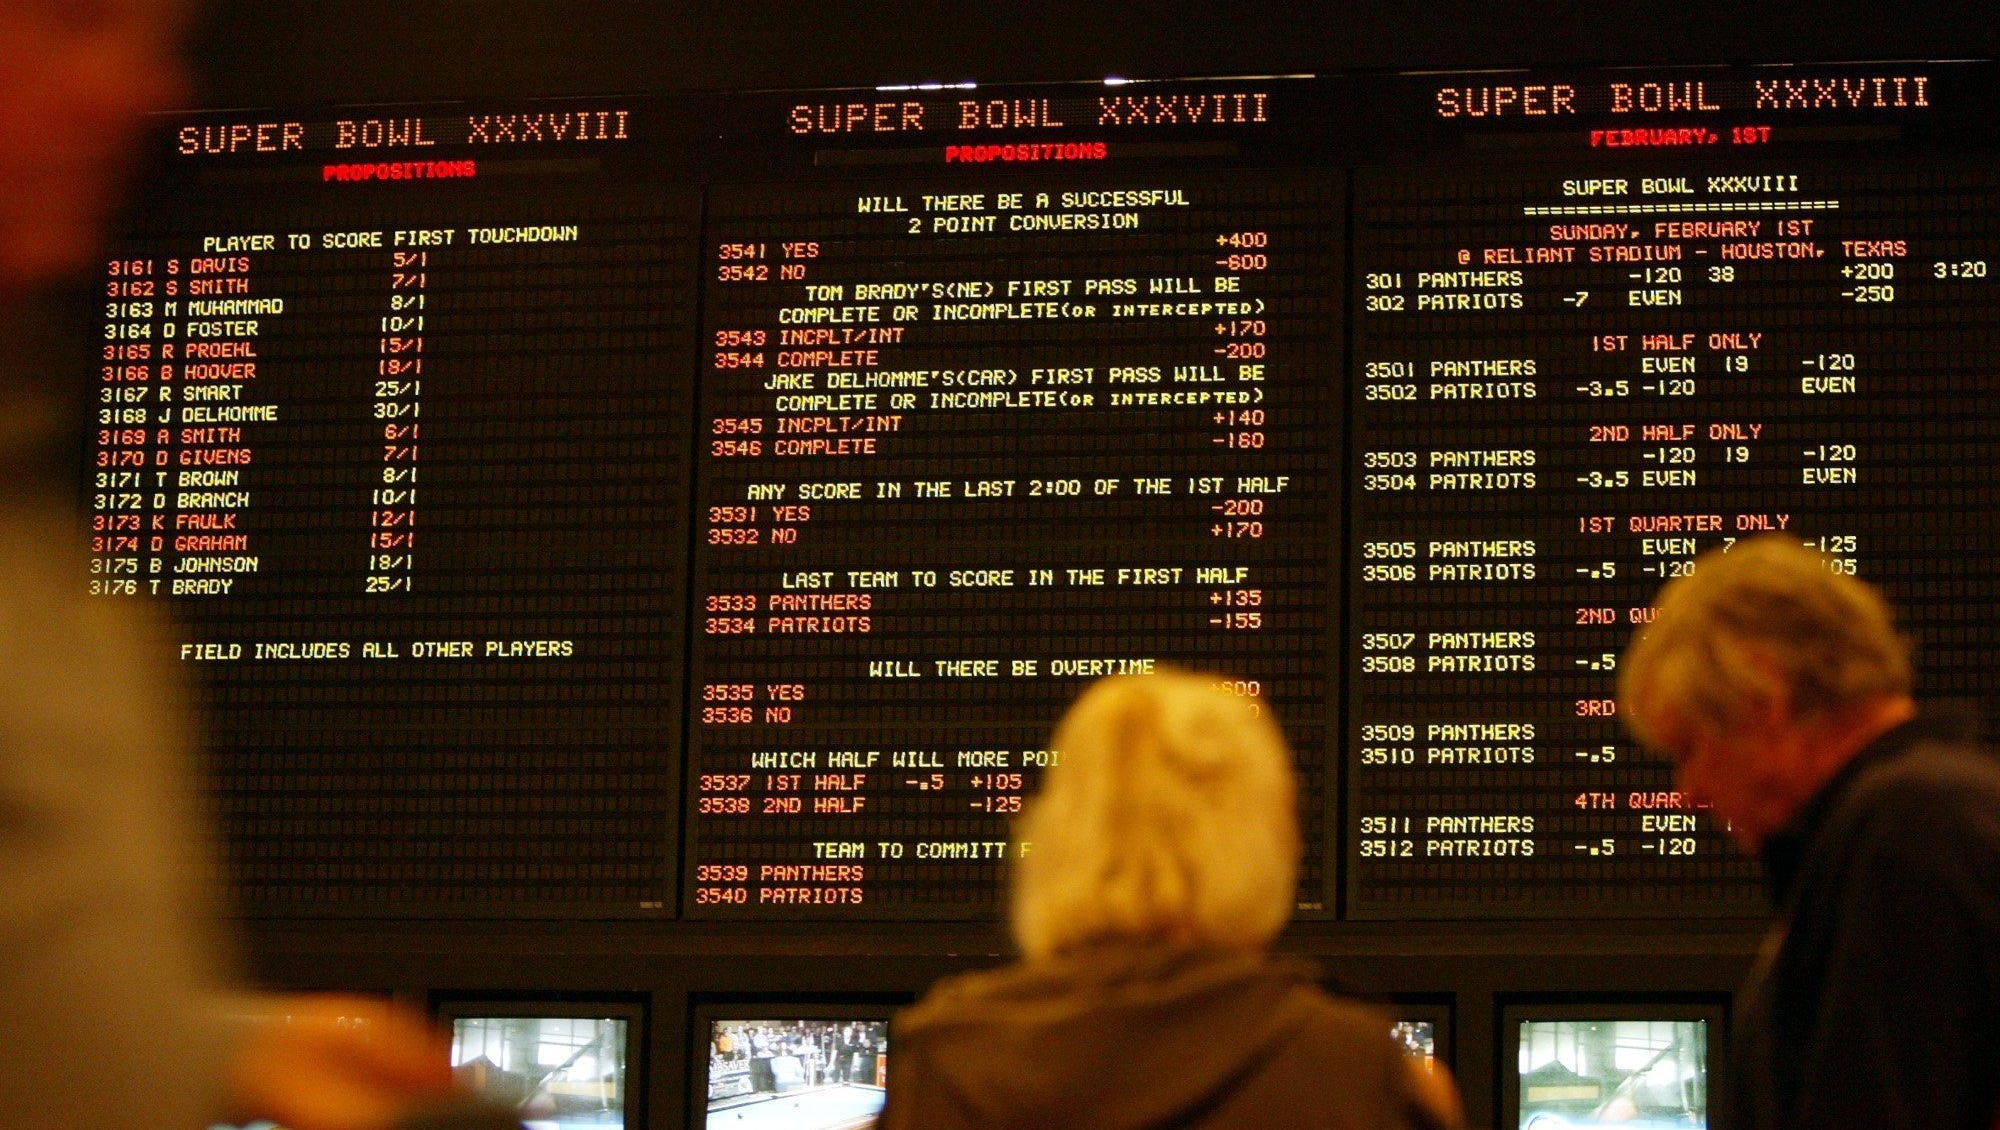 Low Sports Betting Tax Rate A Giveaway To Special Interests Macinnes